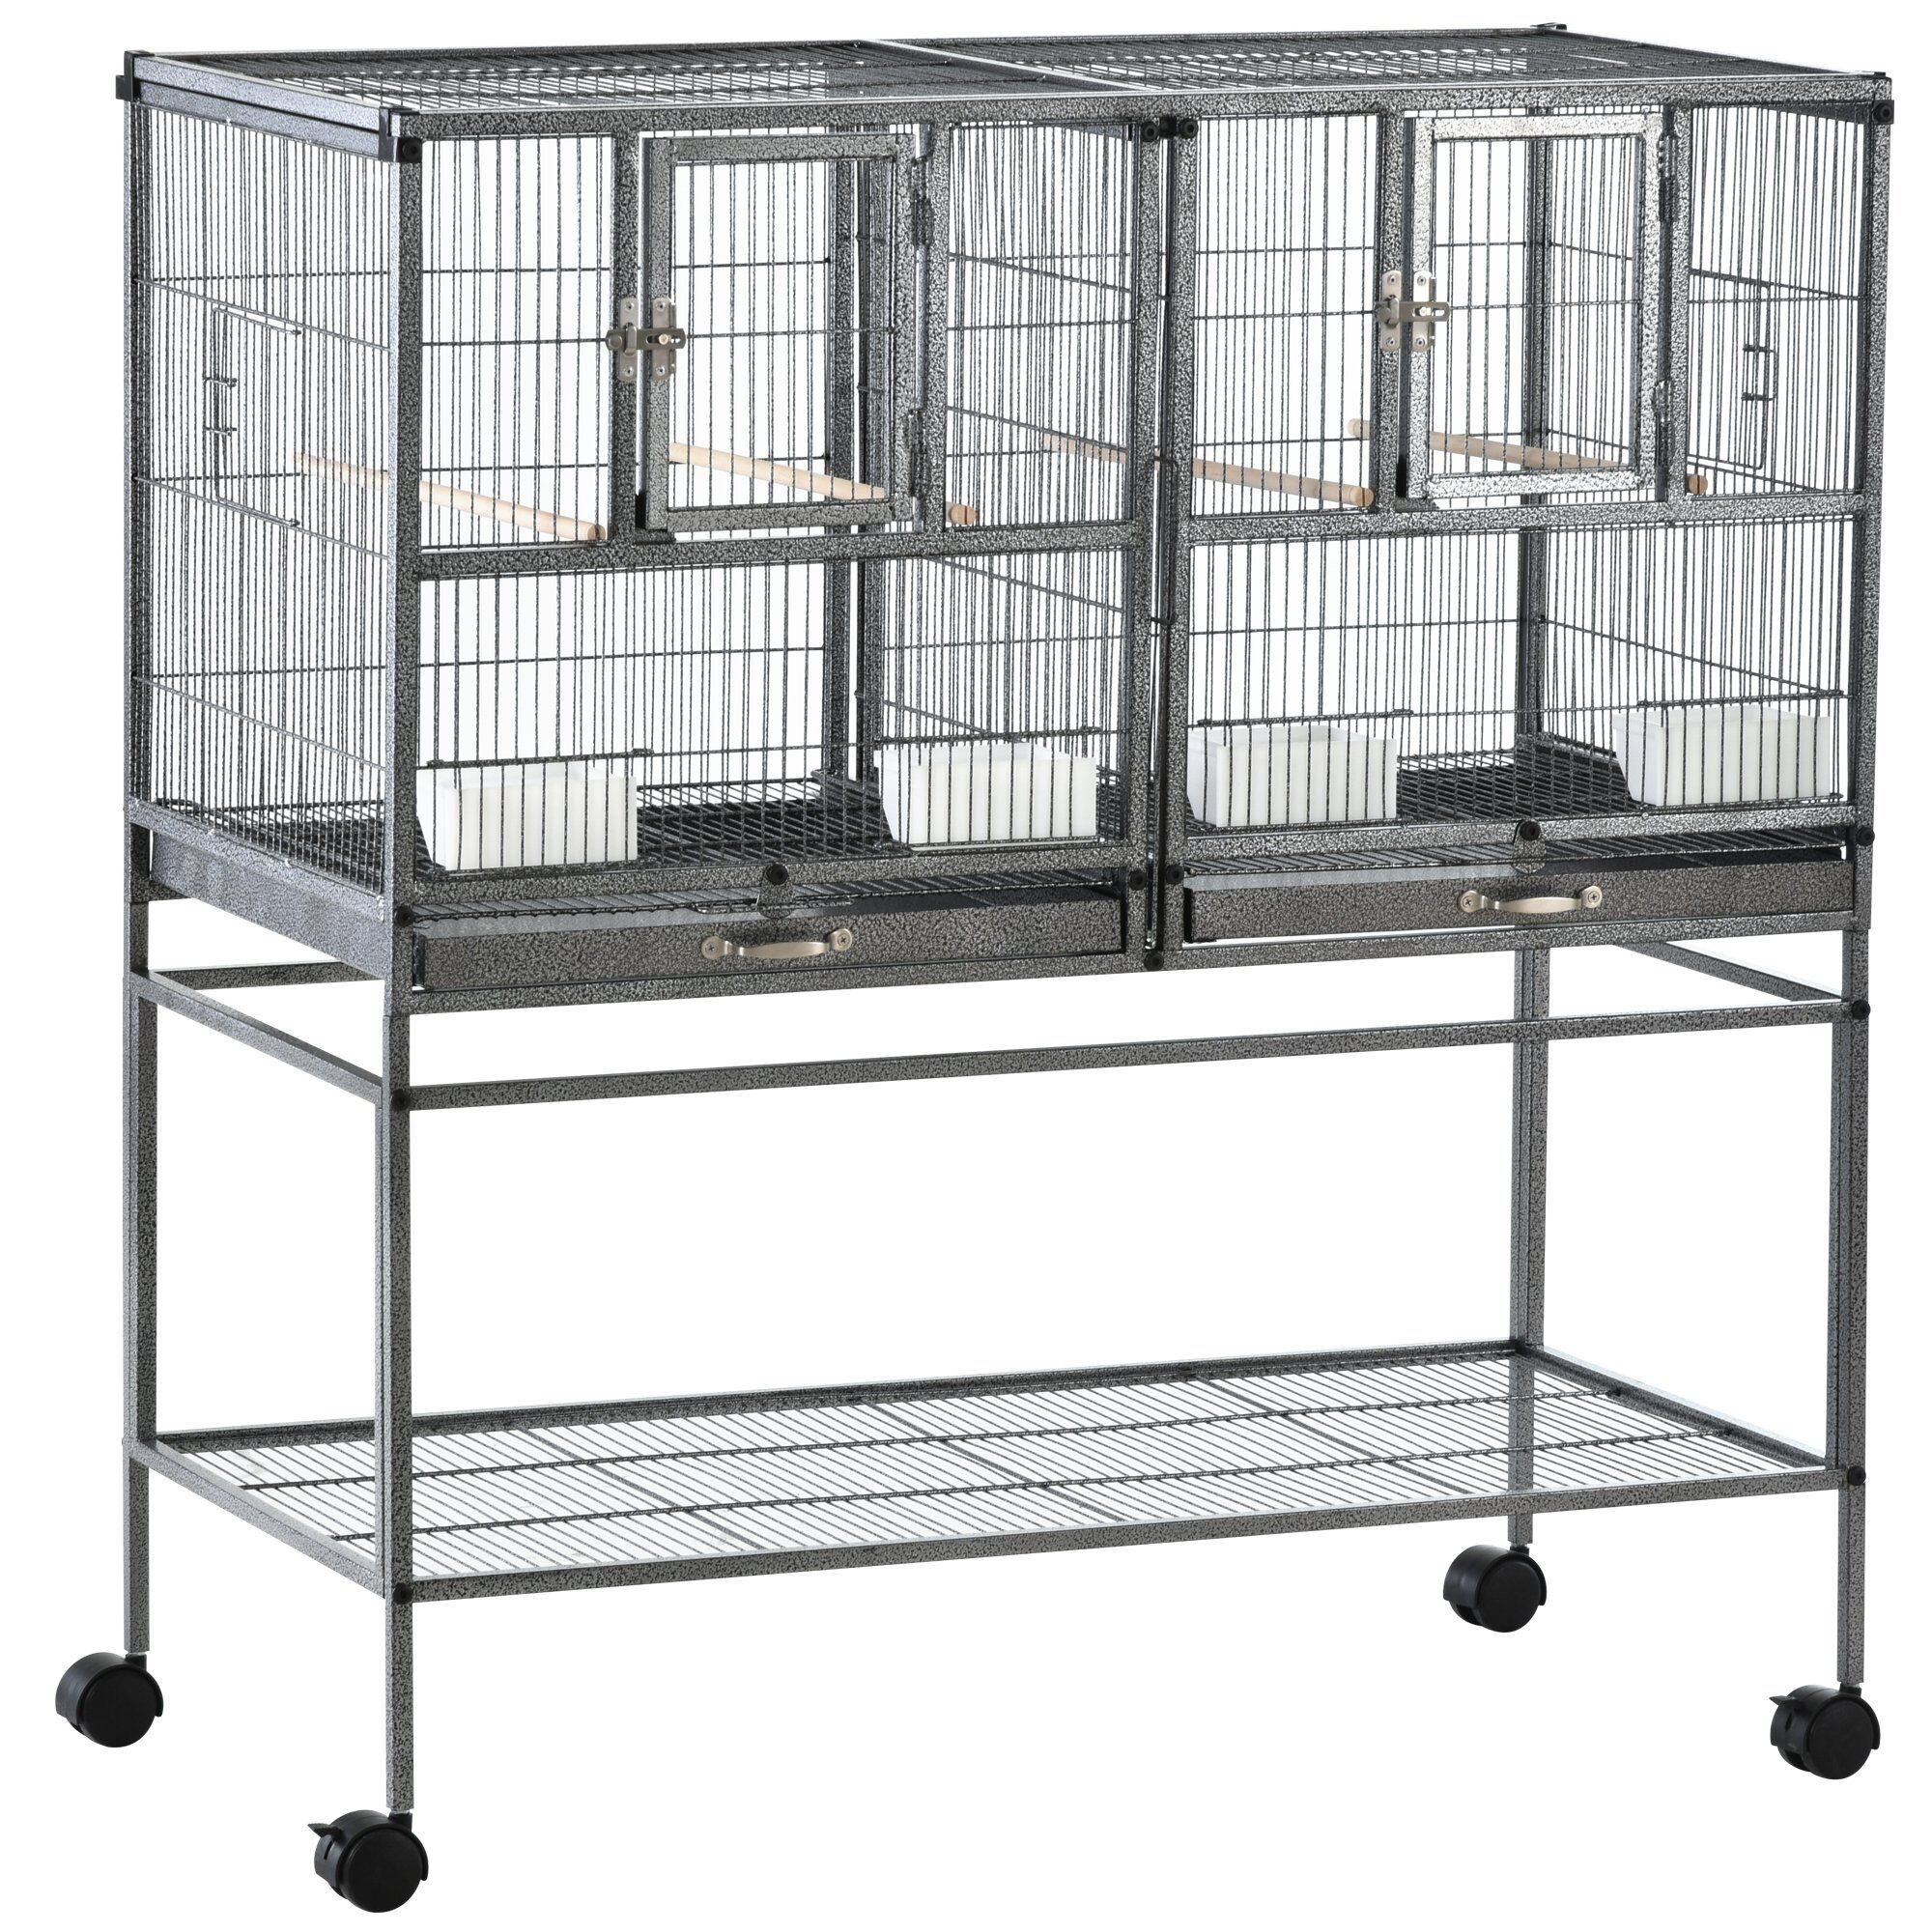 PawHut Double Rolling Metal Bird Cage Large 40.25" H with Storage Shelf Wood Perch Food Container Wheels Black Gray   Aosom.com